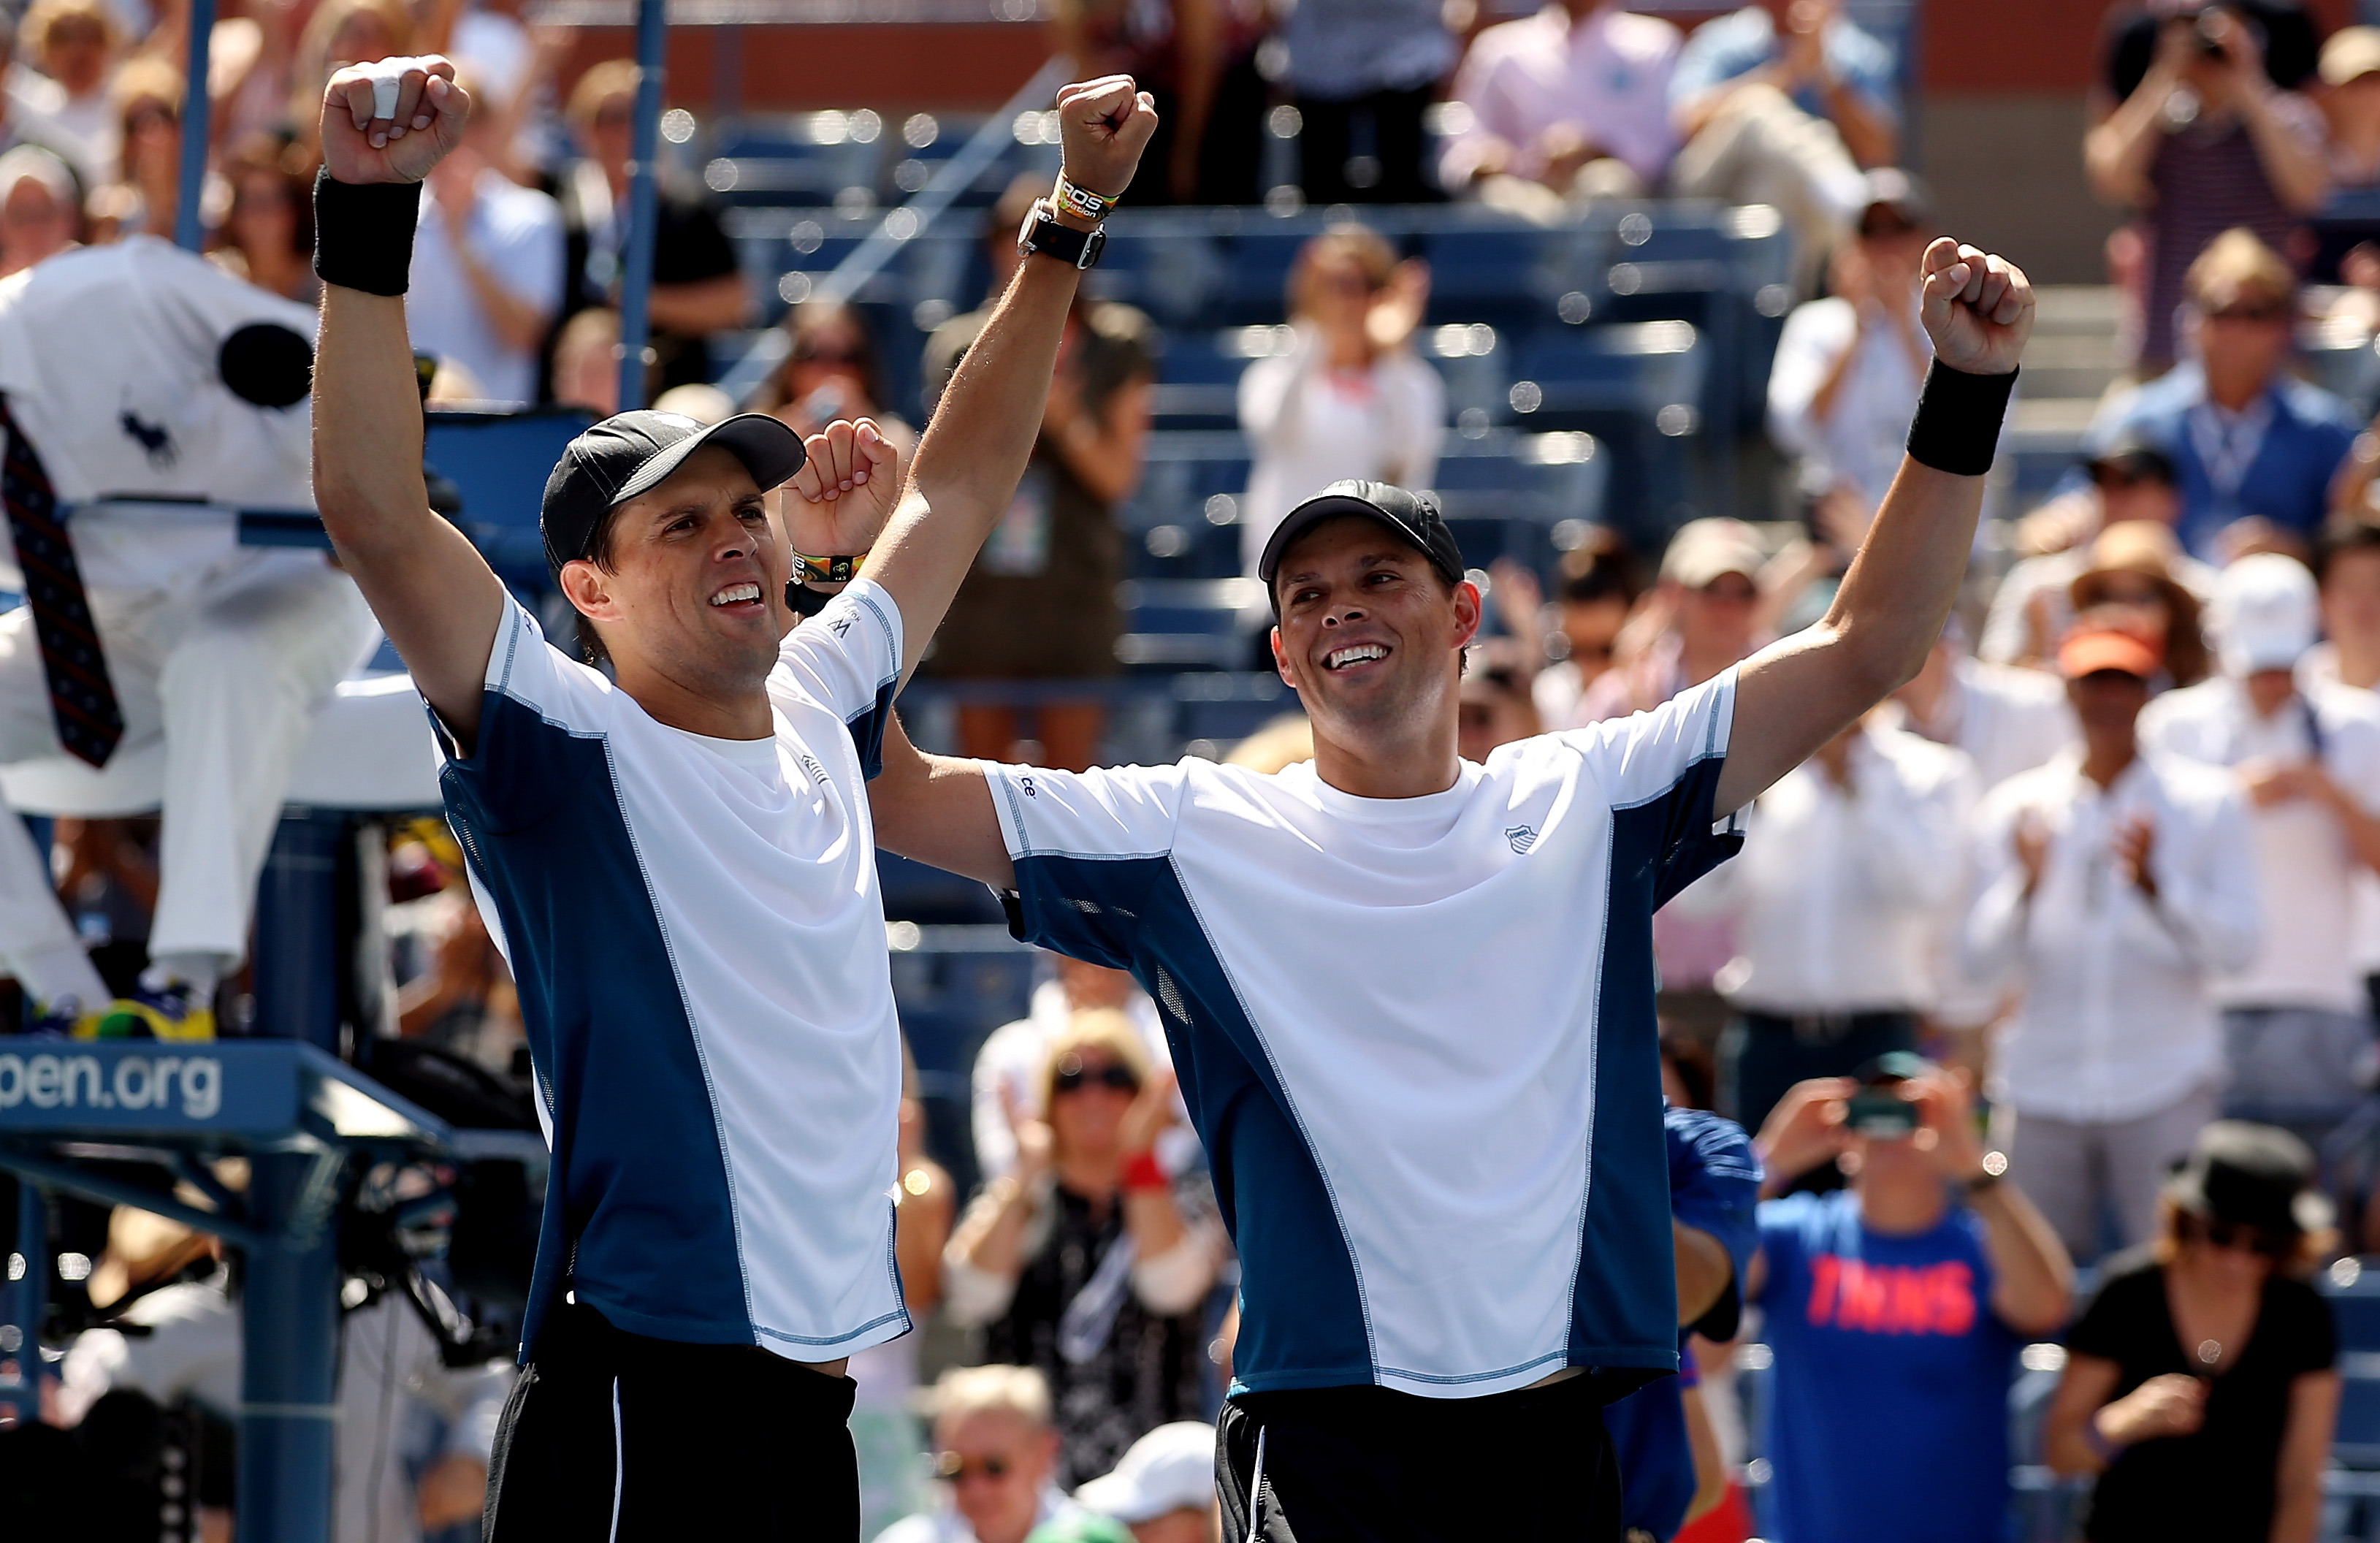 Twins and doubles partners Bob Bryan and Mike Bryan